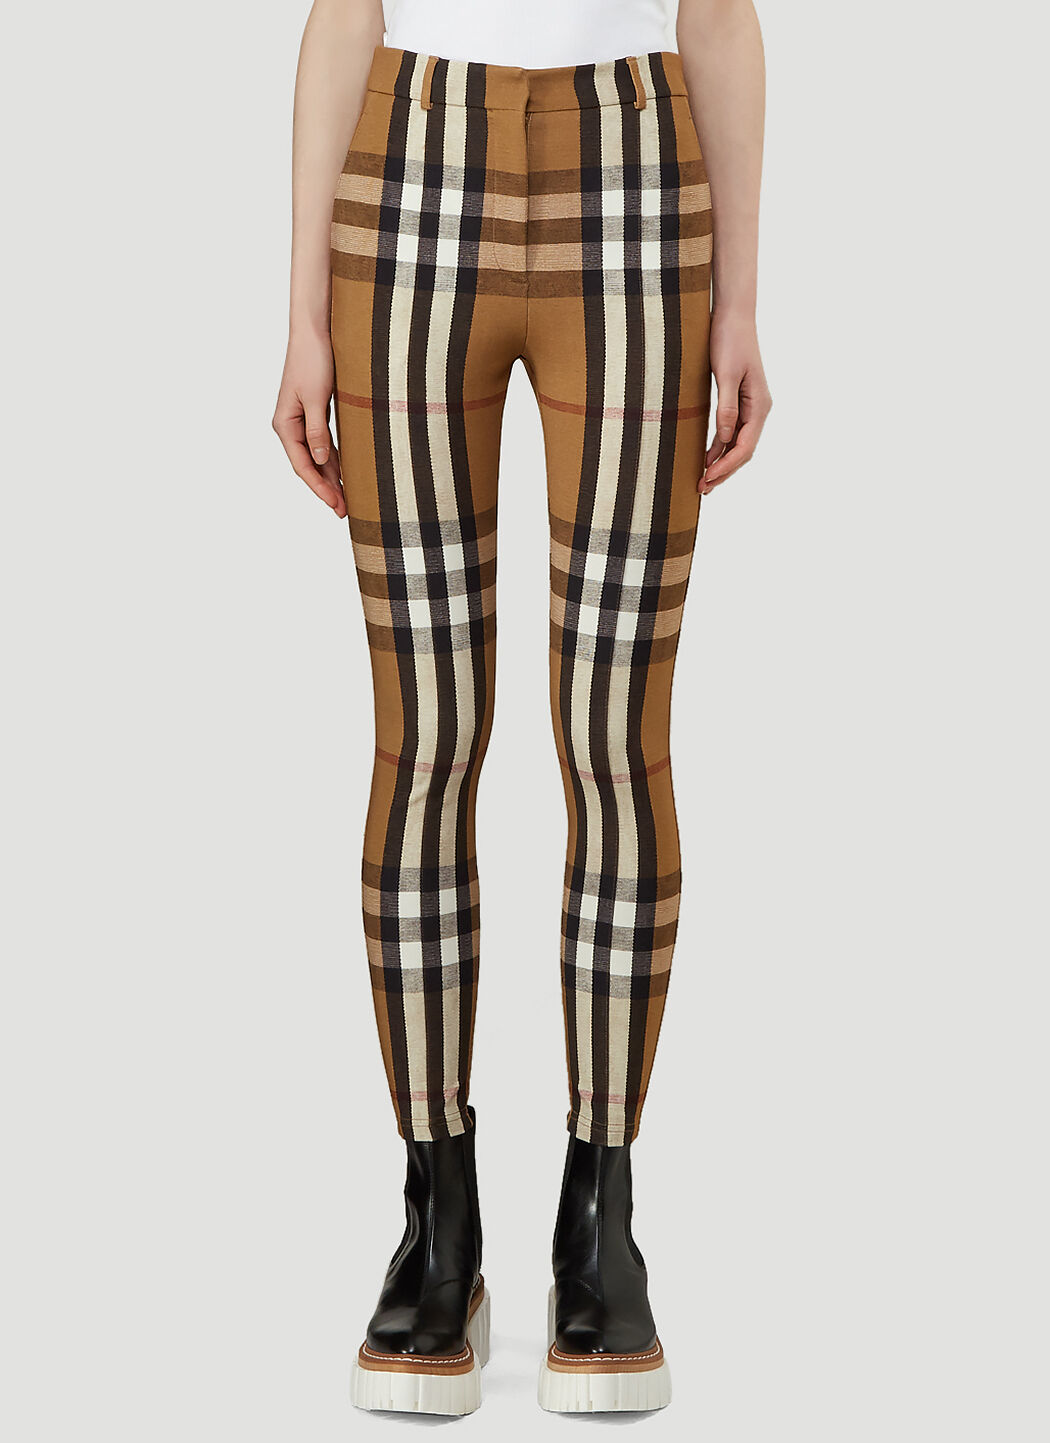 Burberry Trousers Second Hand Burberry Trousers Online Store Burberry  Trousers OutletSale UK  buysell used Burberry Trousers fashion online